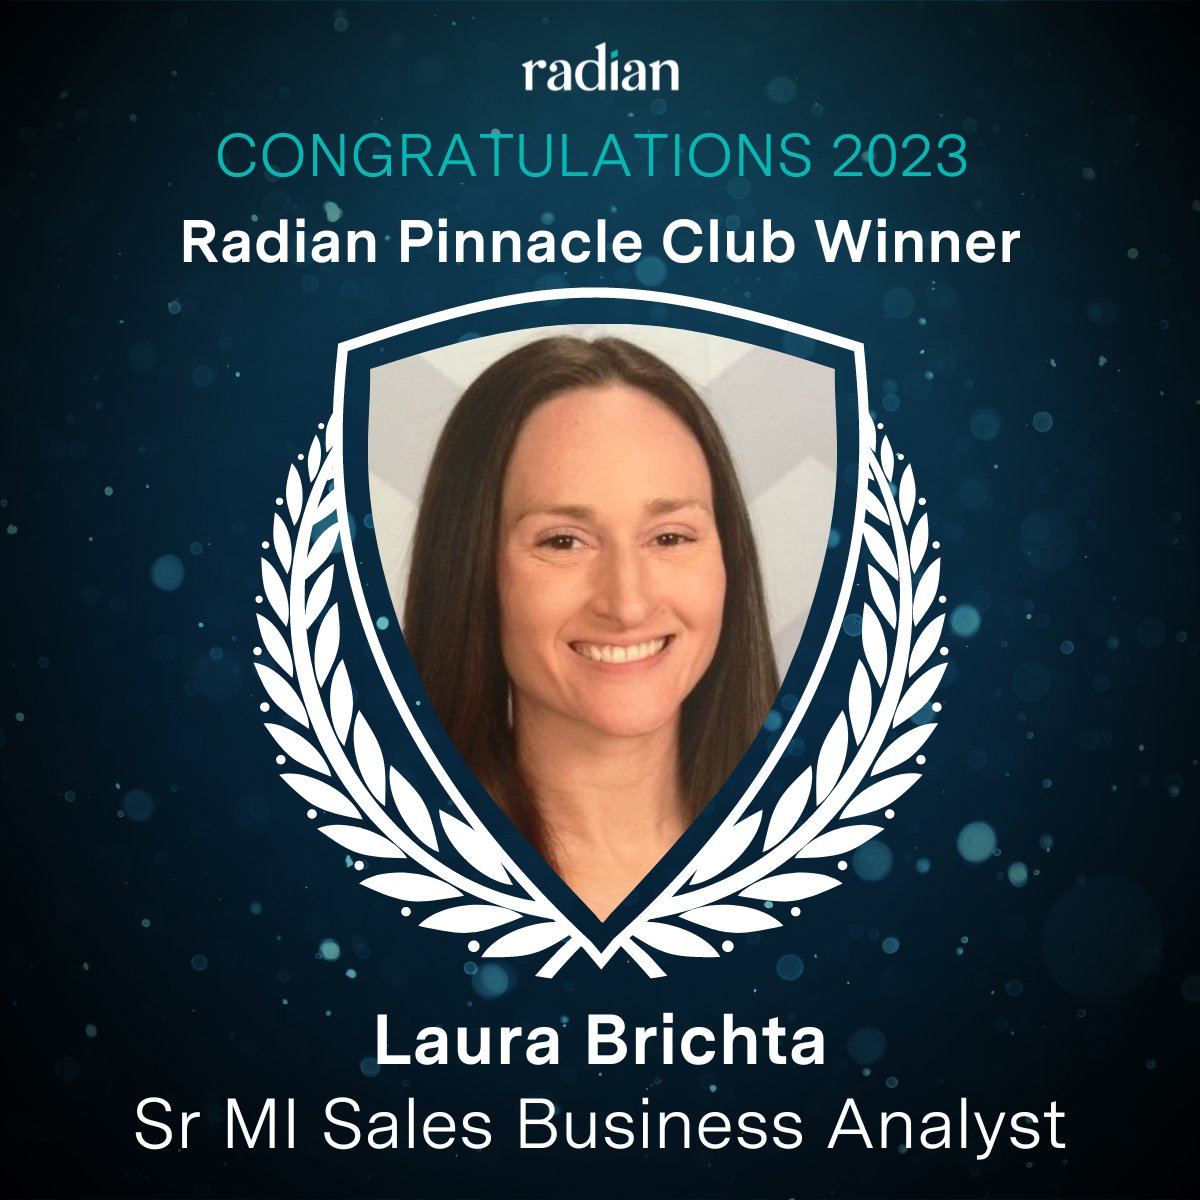 Congratulations to Pinnacle Club winner Laura Brichta, Sr MI Sales Business Analyst. Her approach to “embrace change and find new opportunities to bring more value” has helped her achieve great success in her career. #OneRadian #RadianPinnacleClub #PartnerToWin #WeSeeYouAtRadian